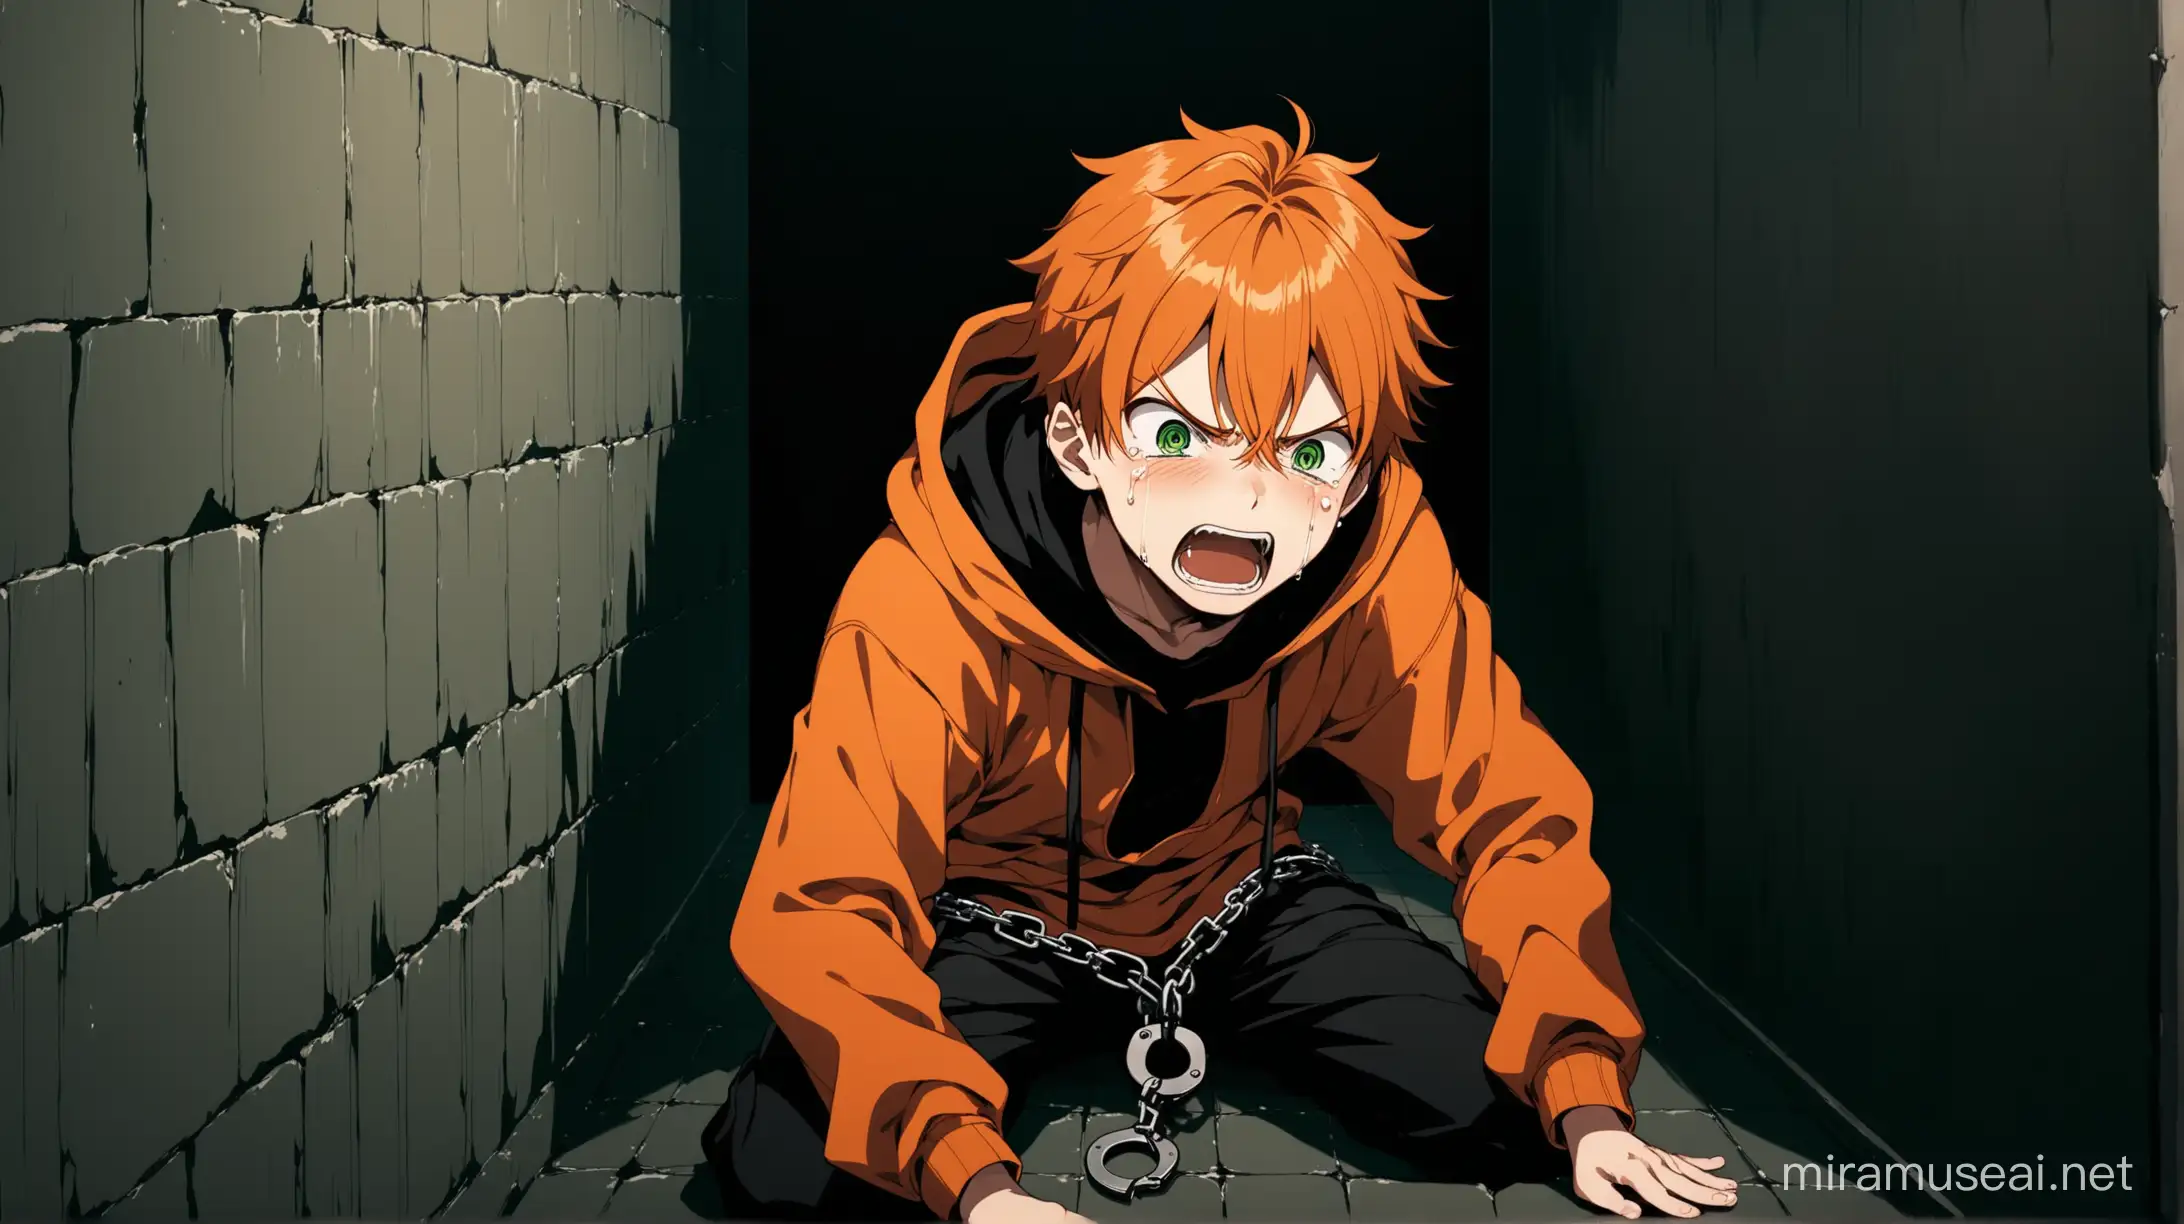 a side body image of an anime boy teenager character who is sitting on the floor supporting a wall and his hands are tied up by a handcuff with the wall. He is crying, screaming,tall, handsome, orange headed, wearing orange and black  hoodie crying and screaming in an underground secret room with dark green contrasts and vibe in anime style 